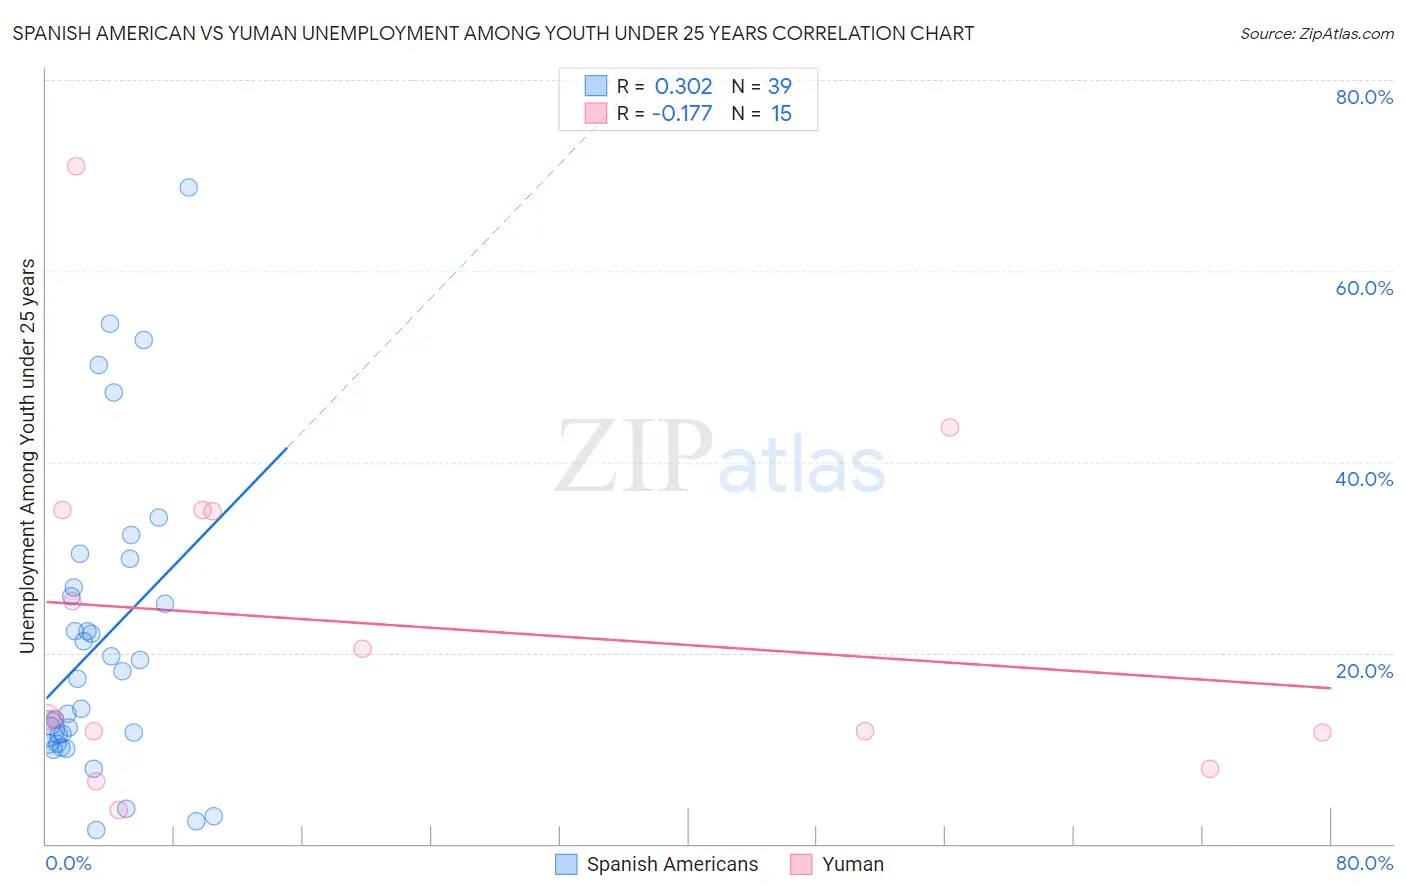 Spanish American vs Yuman Unemployment Among Youth under 25 years